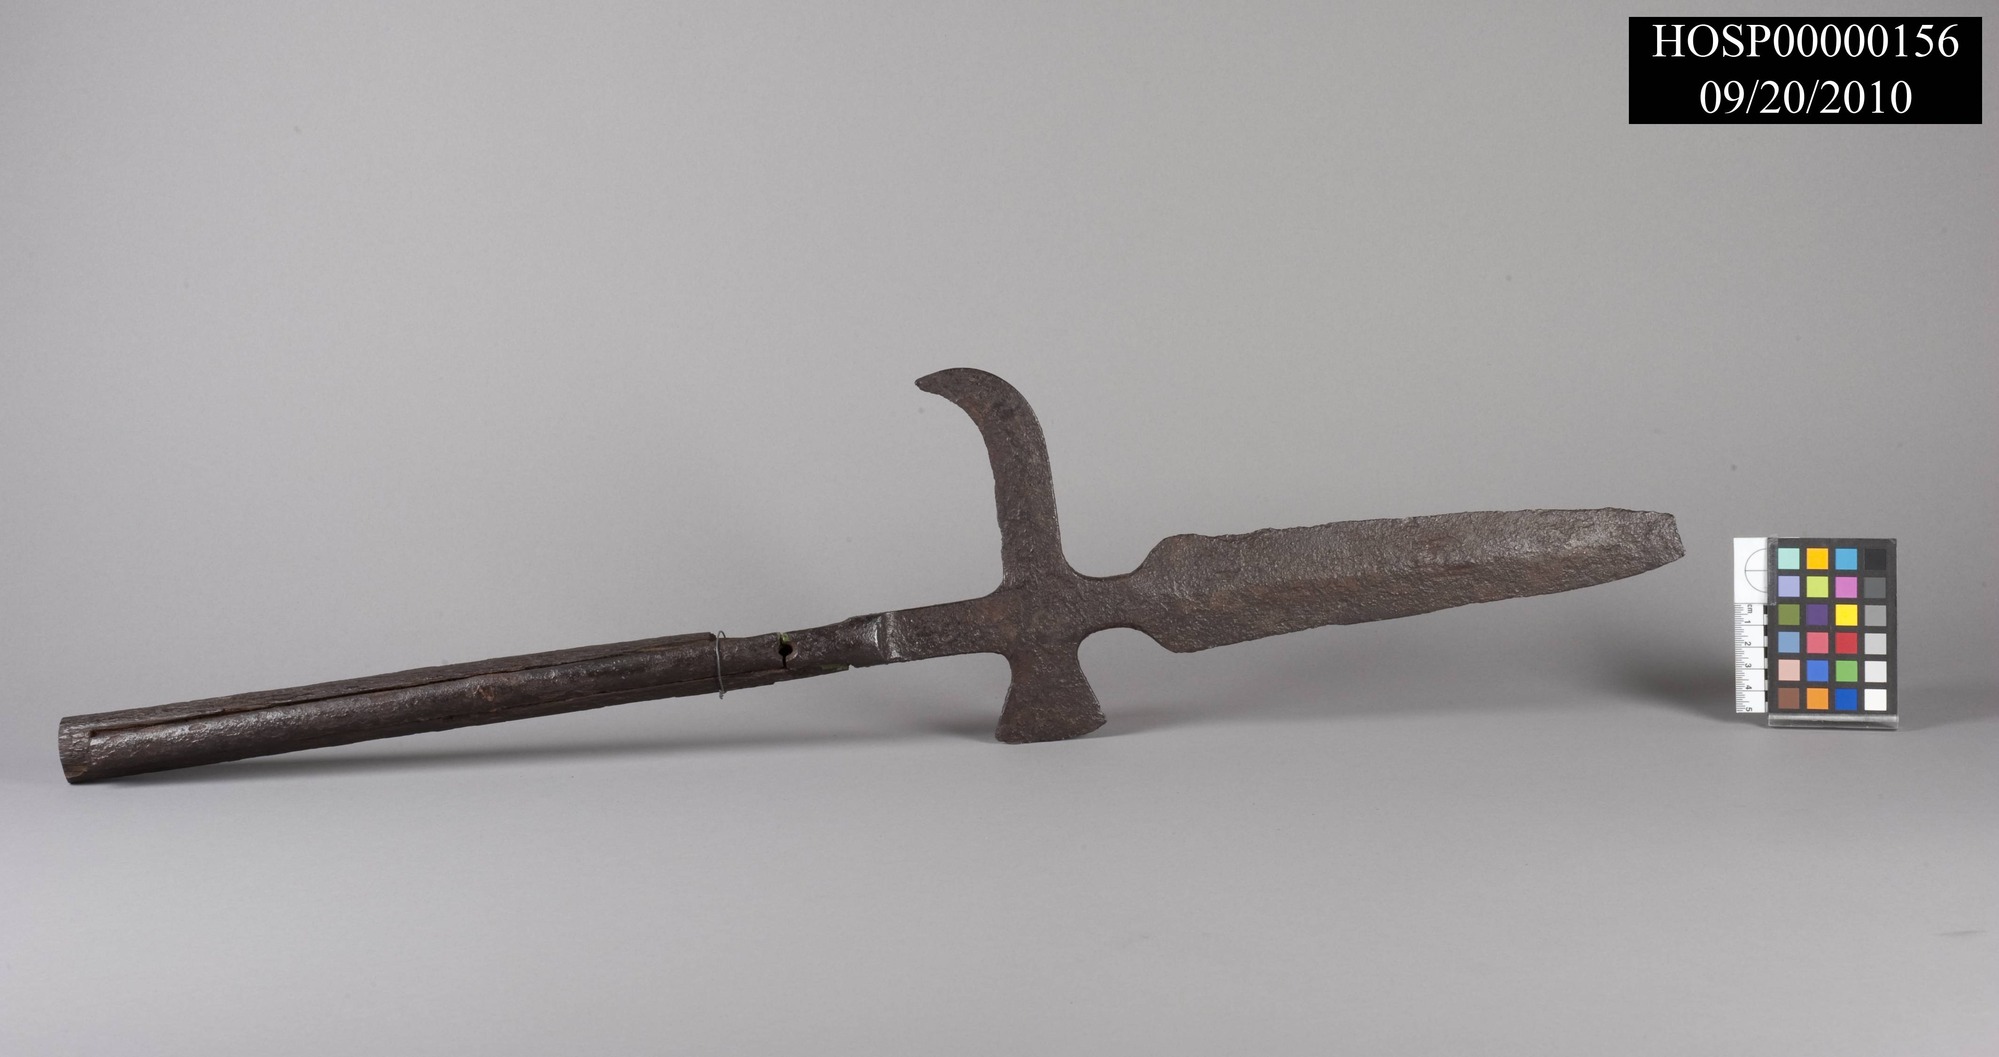 Halberd, Spanish, supposed artifact of DeSoto expedition through Arkansas; iron head, wooden handle banded in iron; head has spear-like point on end (with broken tip), small ax blade on one side, curved hook on opposite side; accompanied by image of John Fordyce drawing of original, sent to HOSP by Dr. Anne Early, Arkansas State Archeologist, in October 2011 (original drawing in archives at University of Arkansas - Fayetteville). Curator's Notes from 8/7/2014 and 10/15/2014: Halberd has been examined by Dr. Jeffrey Michem of AAS and determined likely to be an actual weapon from the DeSoto expedition and Spanish in origin.